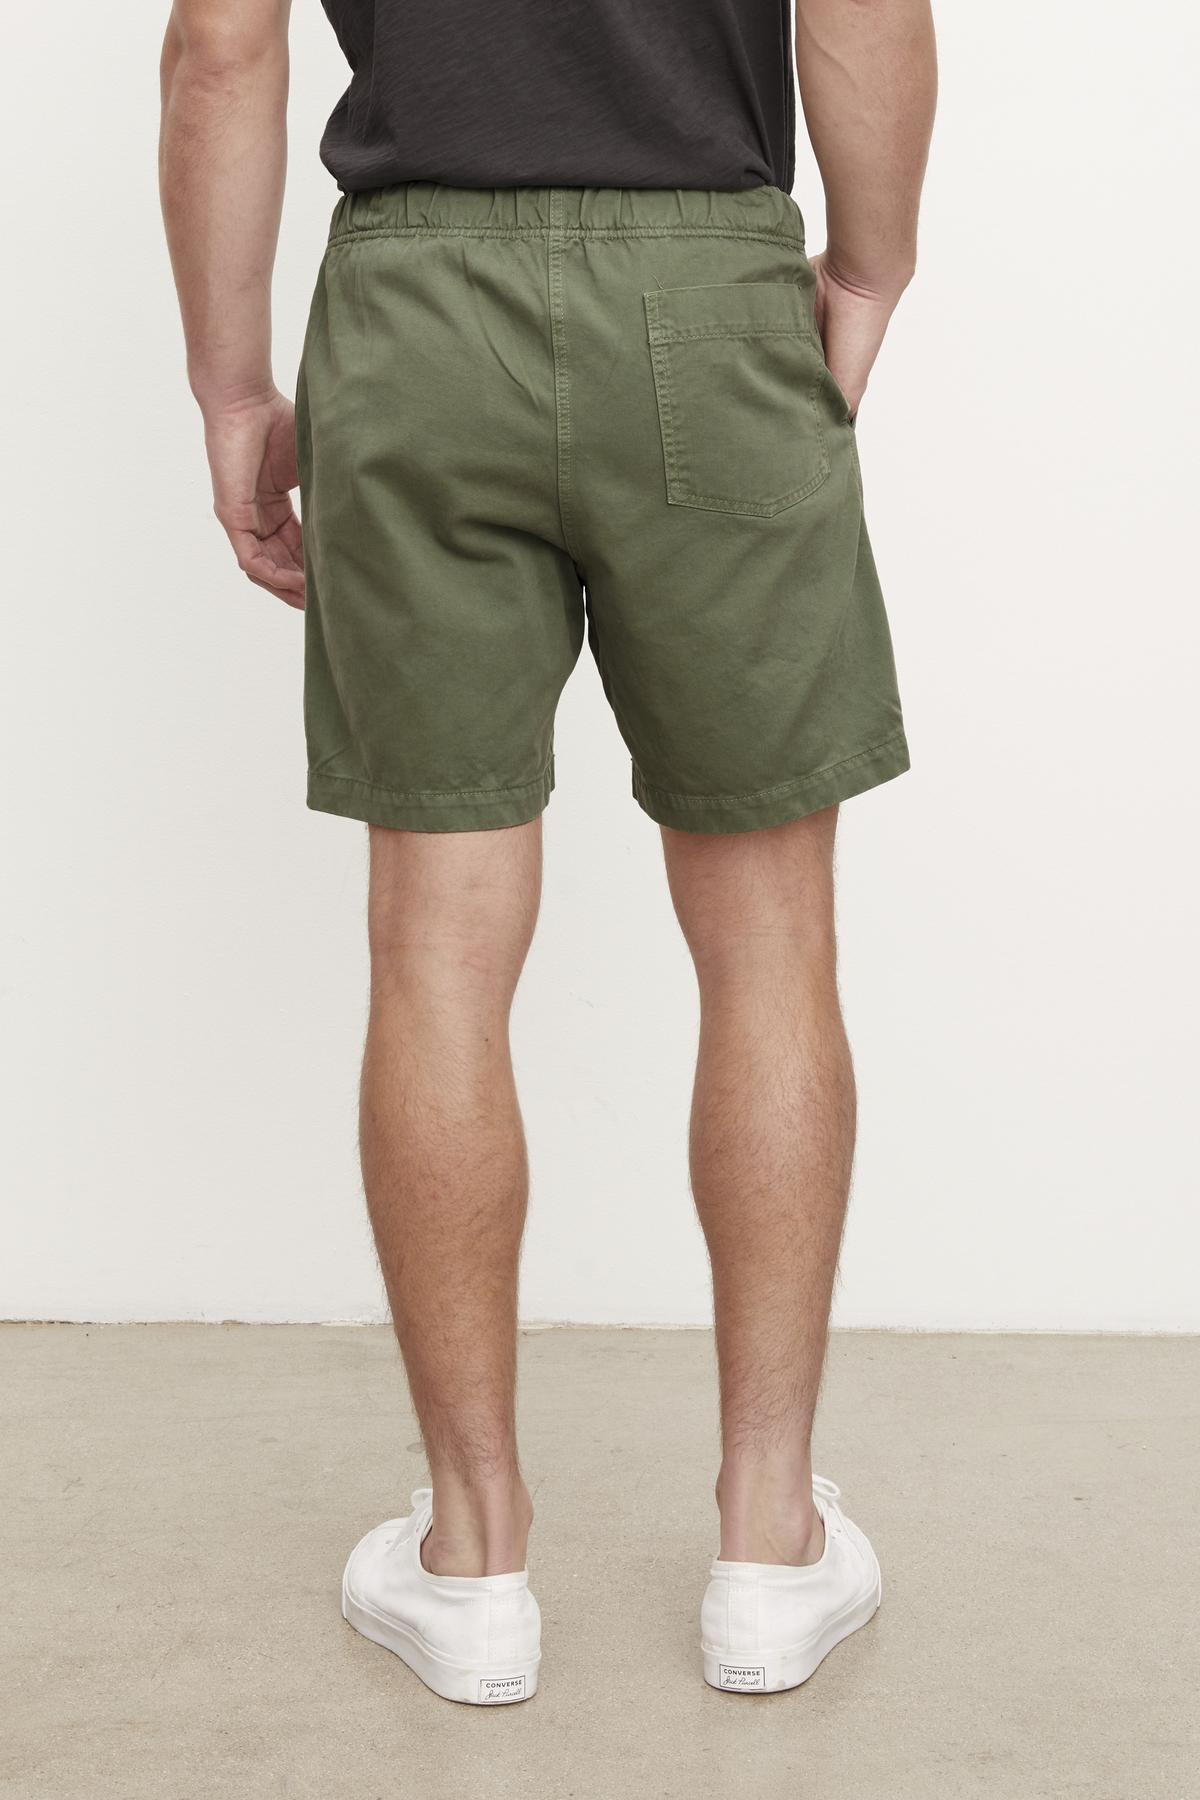 A man wearing Velvet by Graham & Spencer FIELDER SHORT in olive green cotton twill shorts and white sneakers standing with his back to the camera, indoors against a white wall.-36805393940673